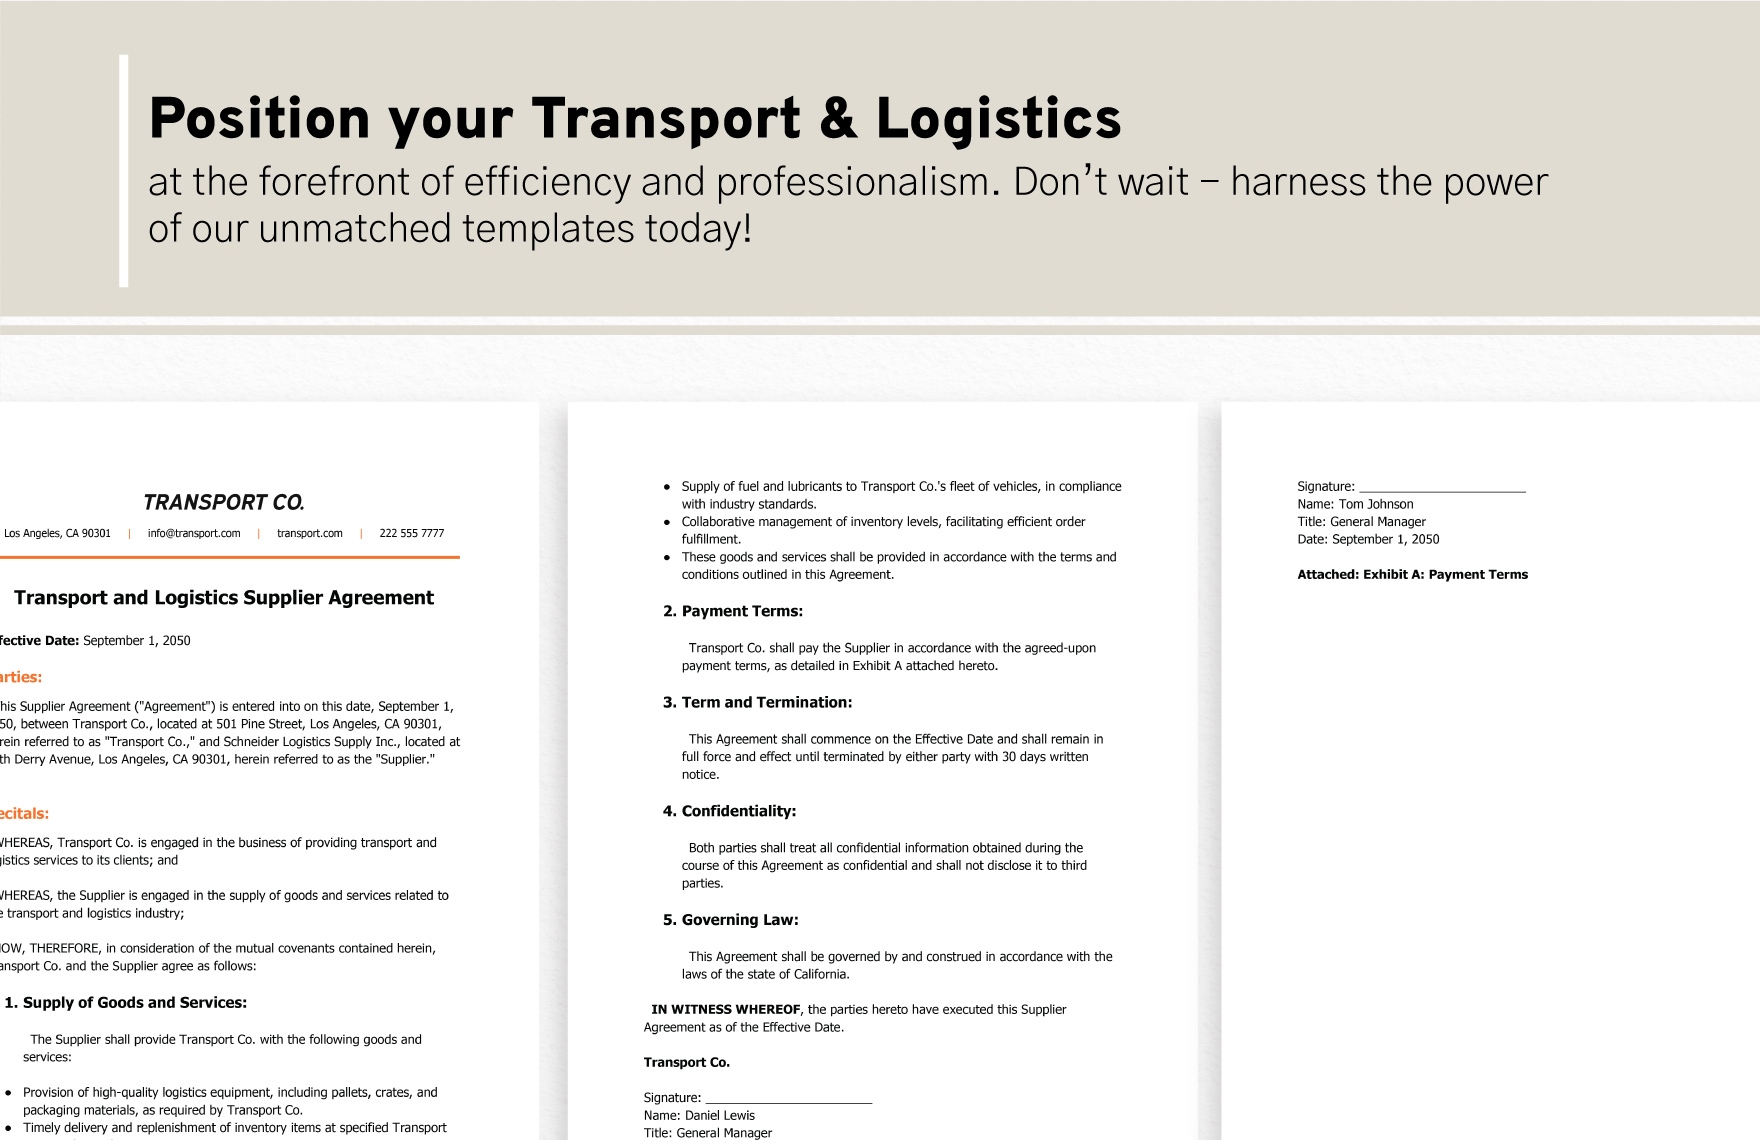 Transport and Logistics Supplier Agreement Template